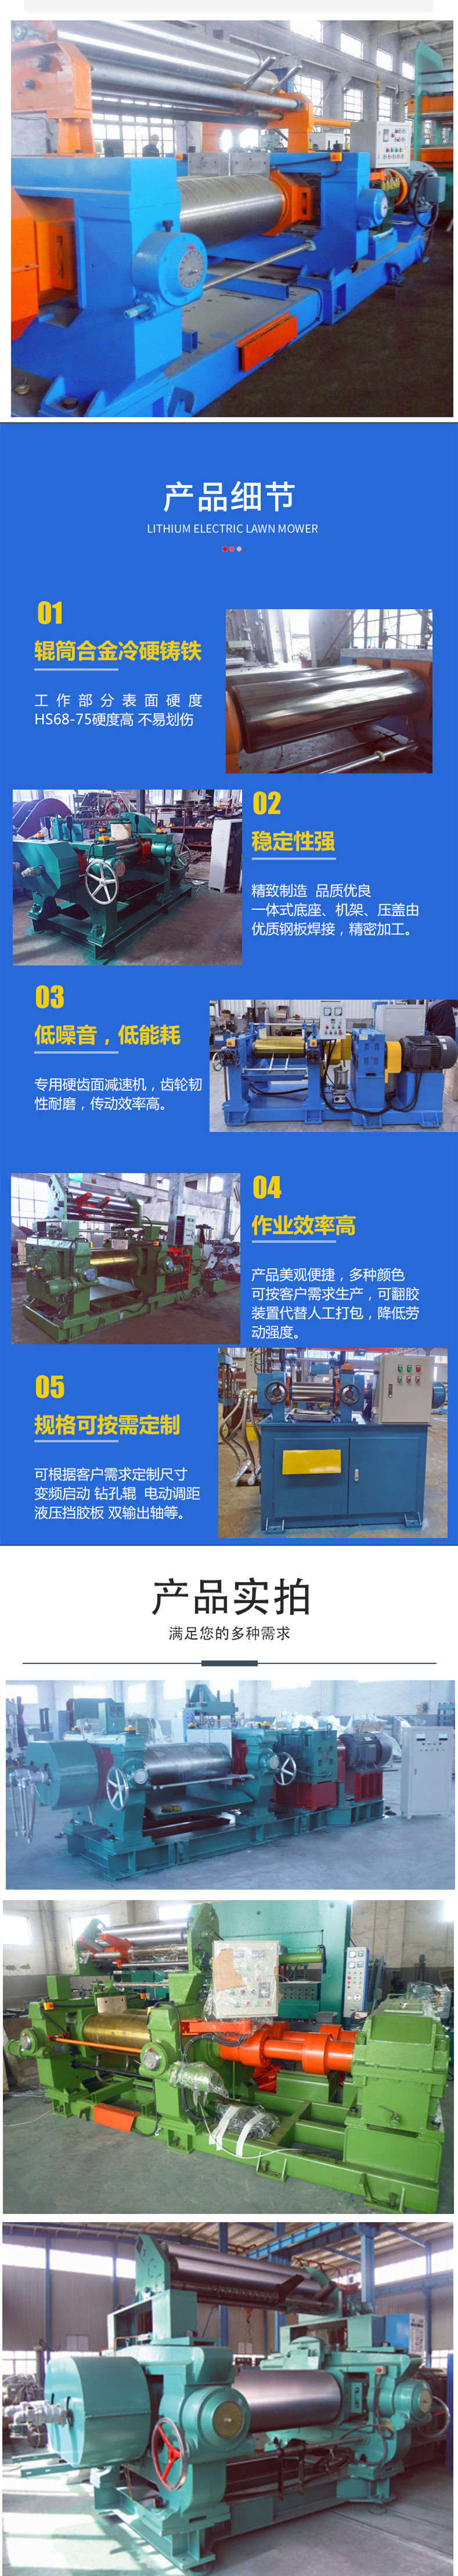 Jiaxin Run 18 inch nylon tile type rubber mixer -450 double roller large gear type open mill - customized hard tooth surface type